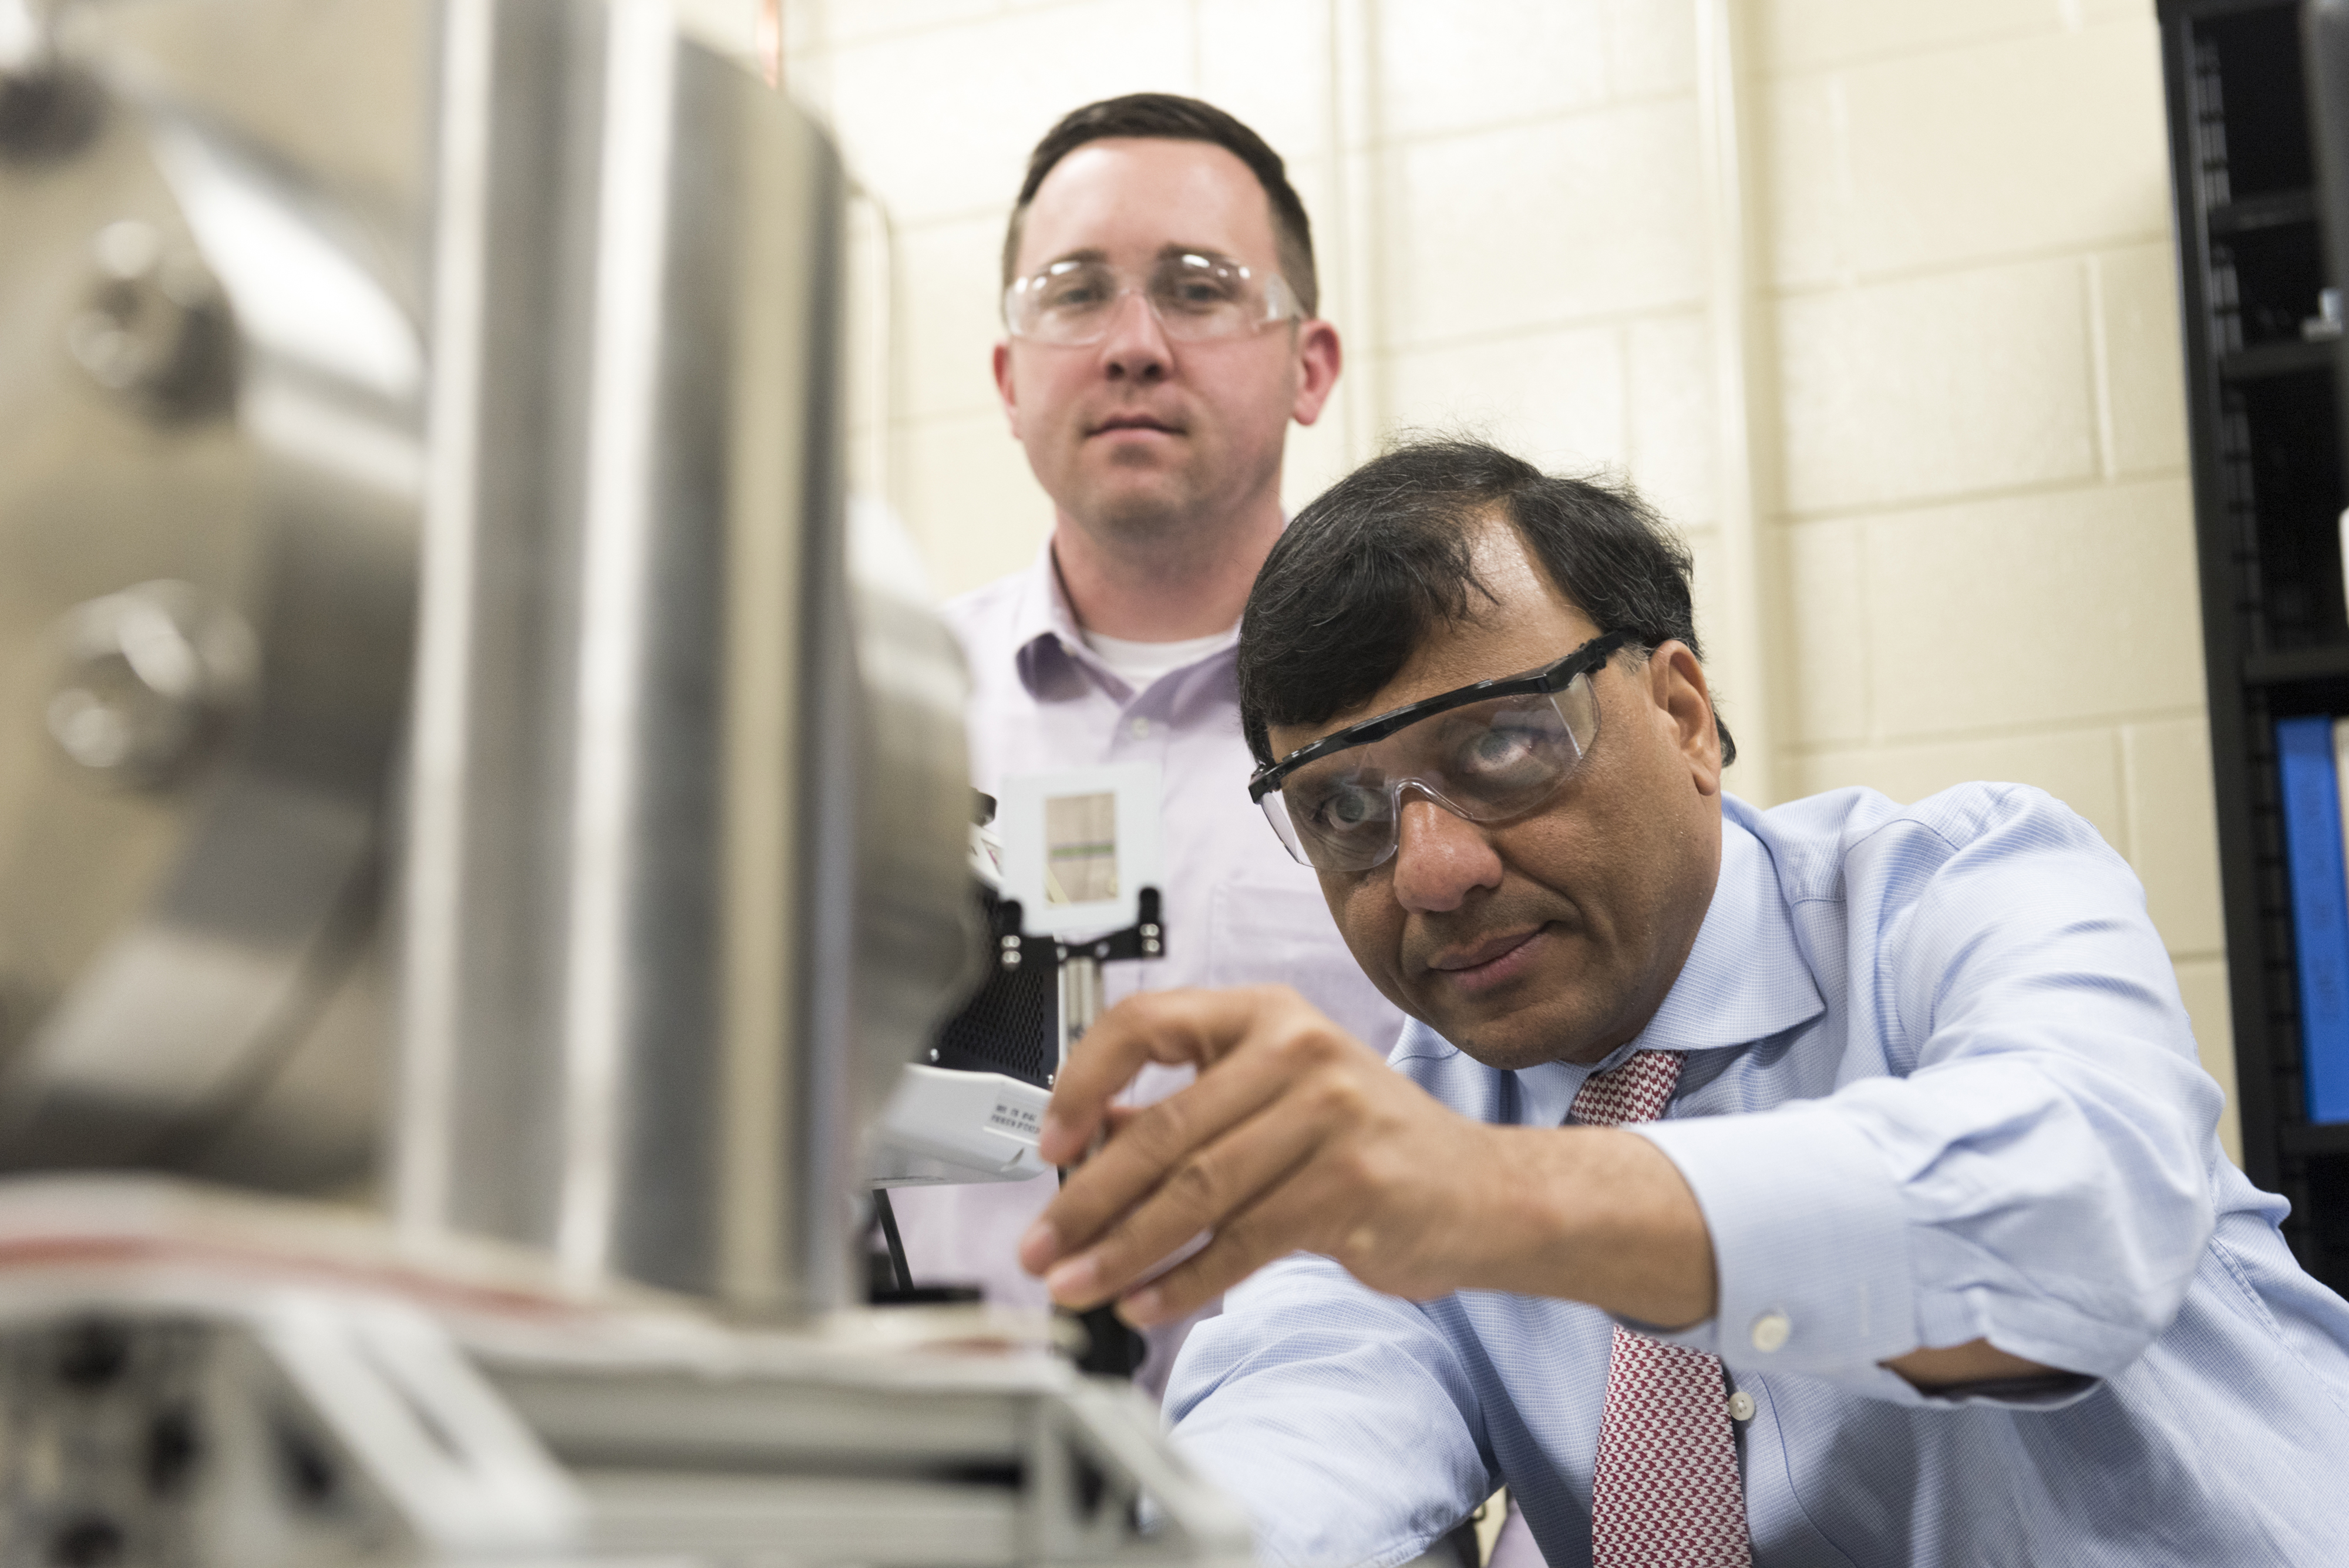 UA Engineers Part of Research to Maximize U.S. Fuel Economy